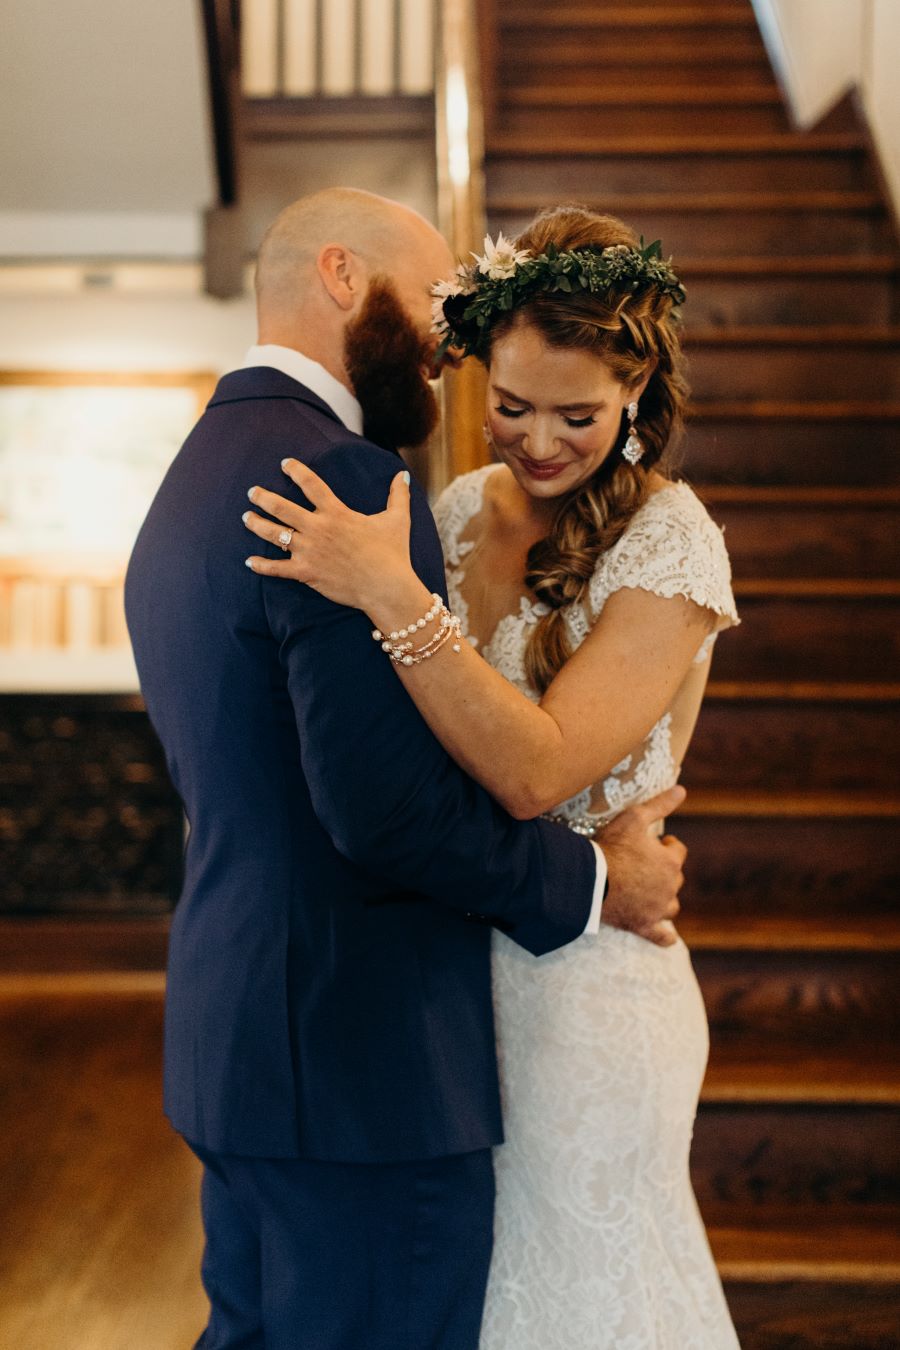 Bride and groom hugging after first look / earthy / fall / October / burgundy